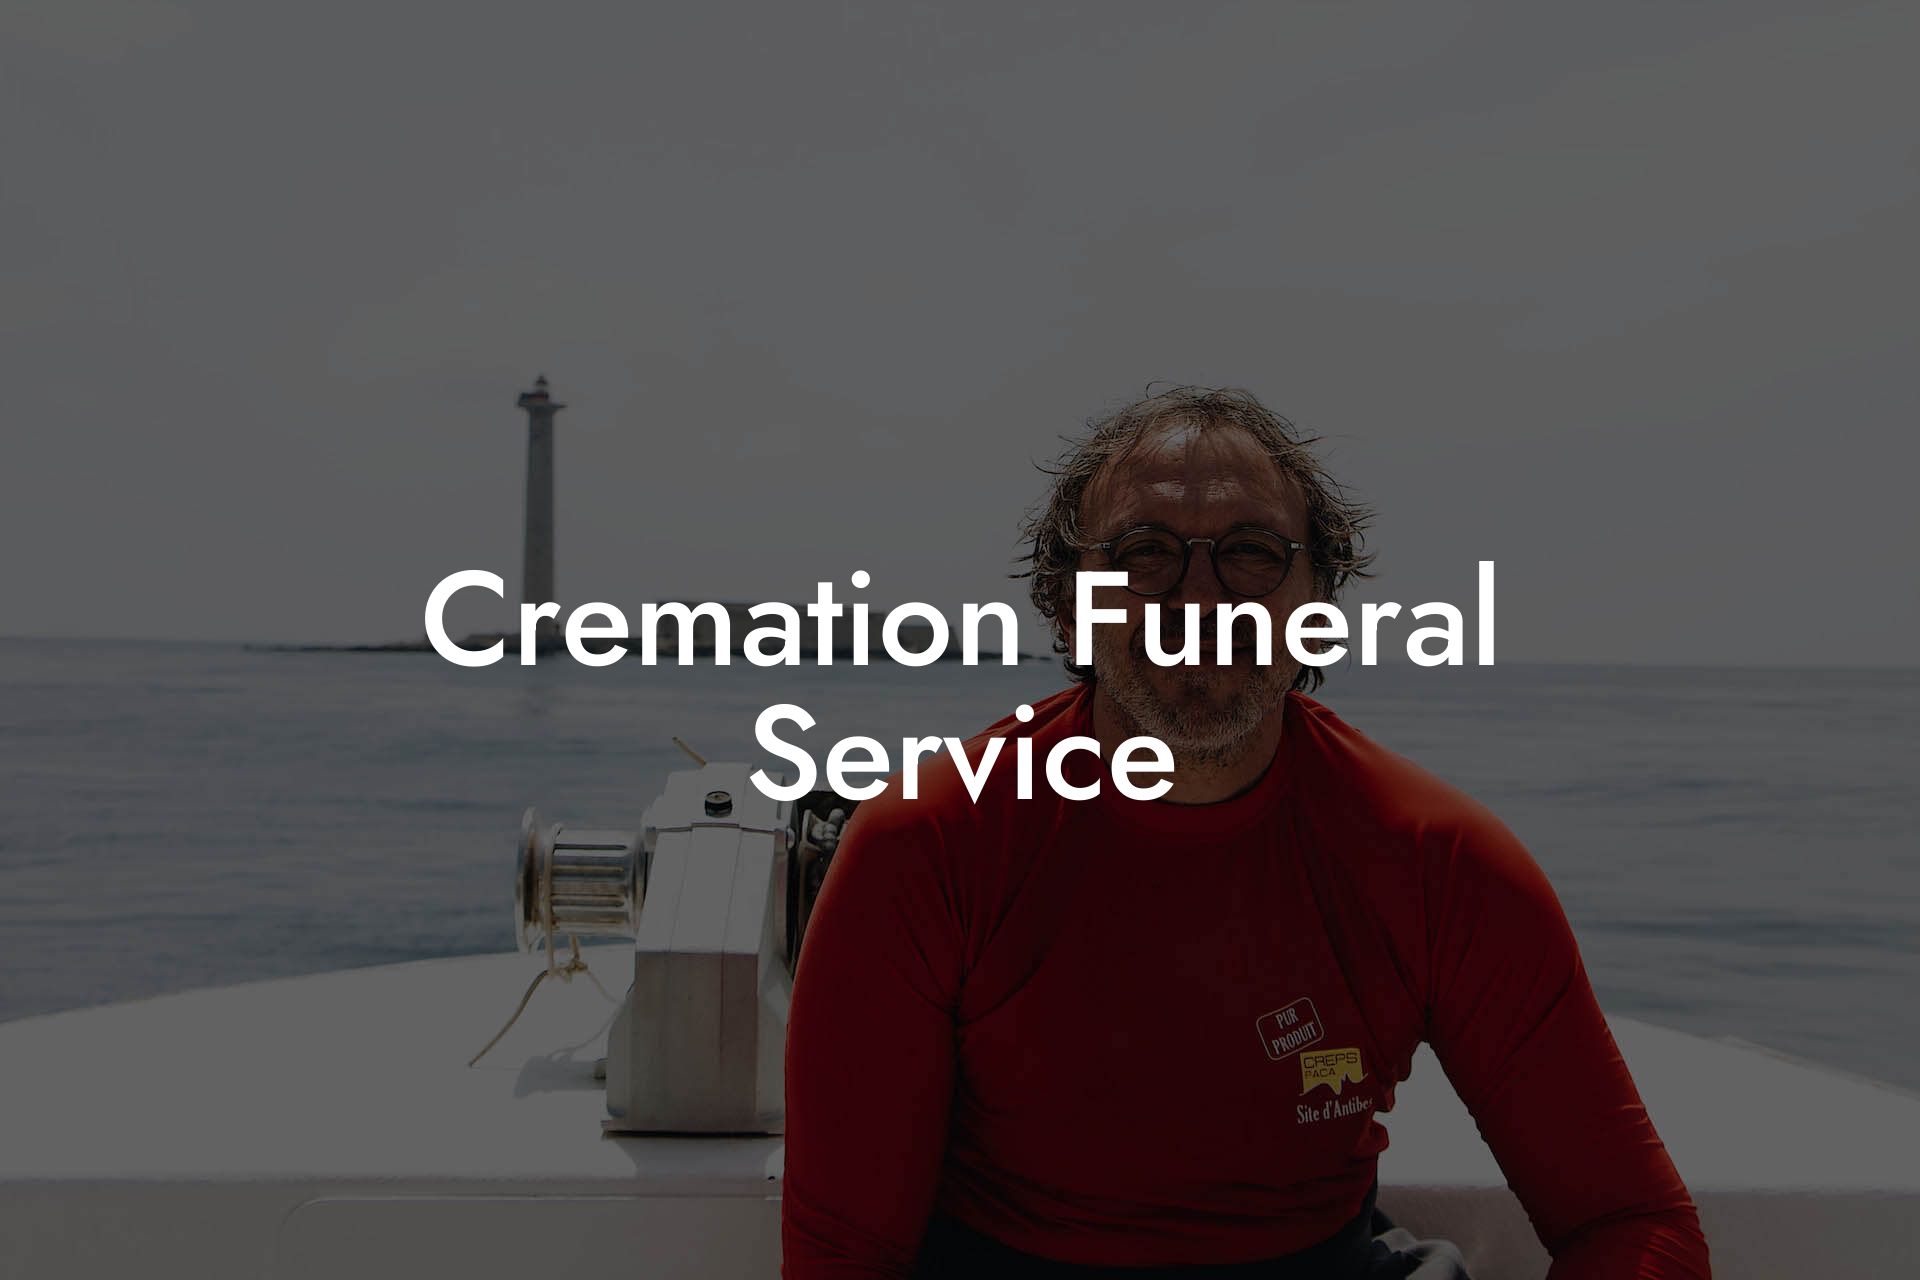 Cremation Funeral Service